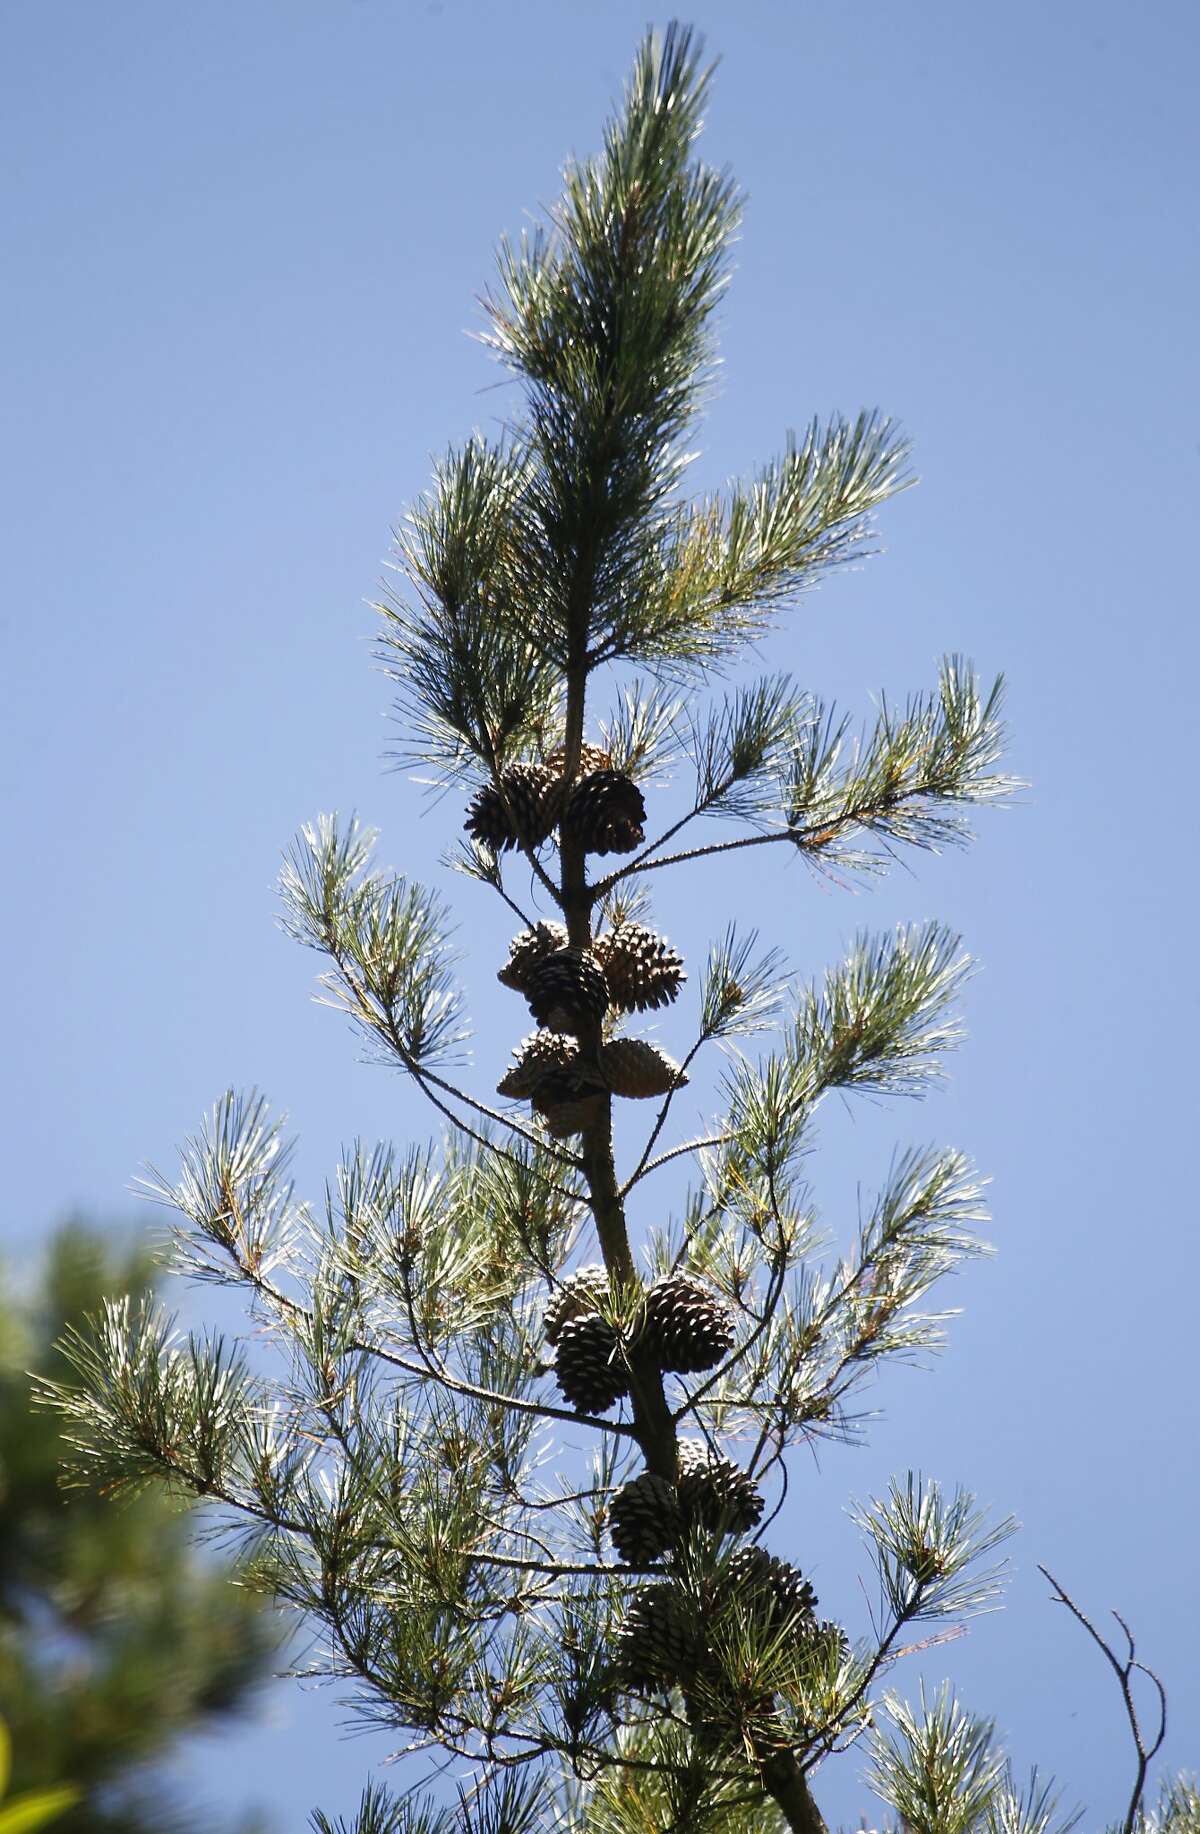 Pine cones hang from a Monterey pine tree at Redwood Regional Park in Oakland, Calif. on Wednesday, July 15, 2015. A controversial plan to remove thousands of trees in the East Bay hills as part of a federally-funded fire mitigation program is being opposed by the Save the East Bay Hills community group and several others.